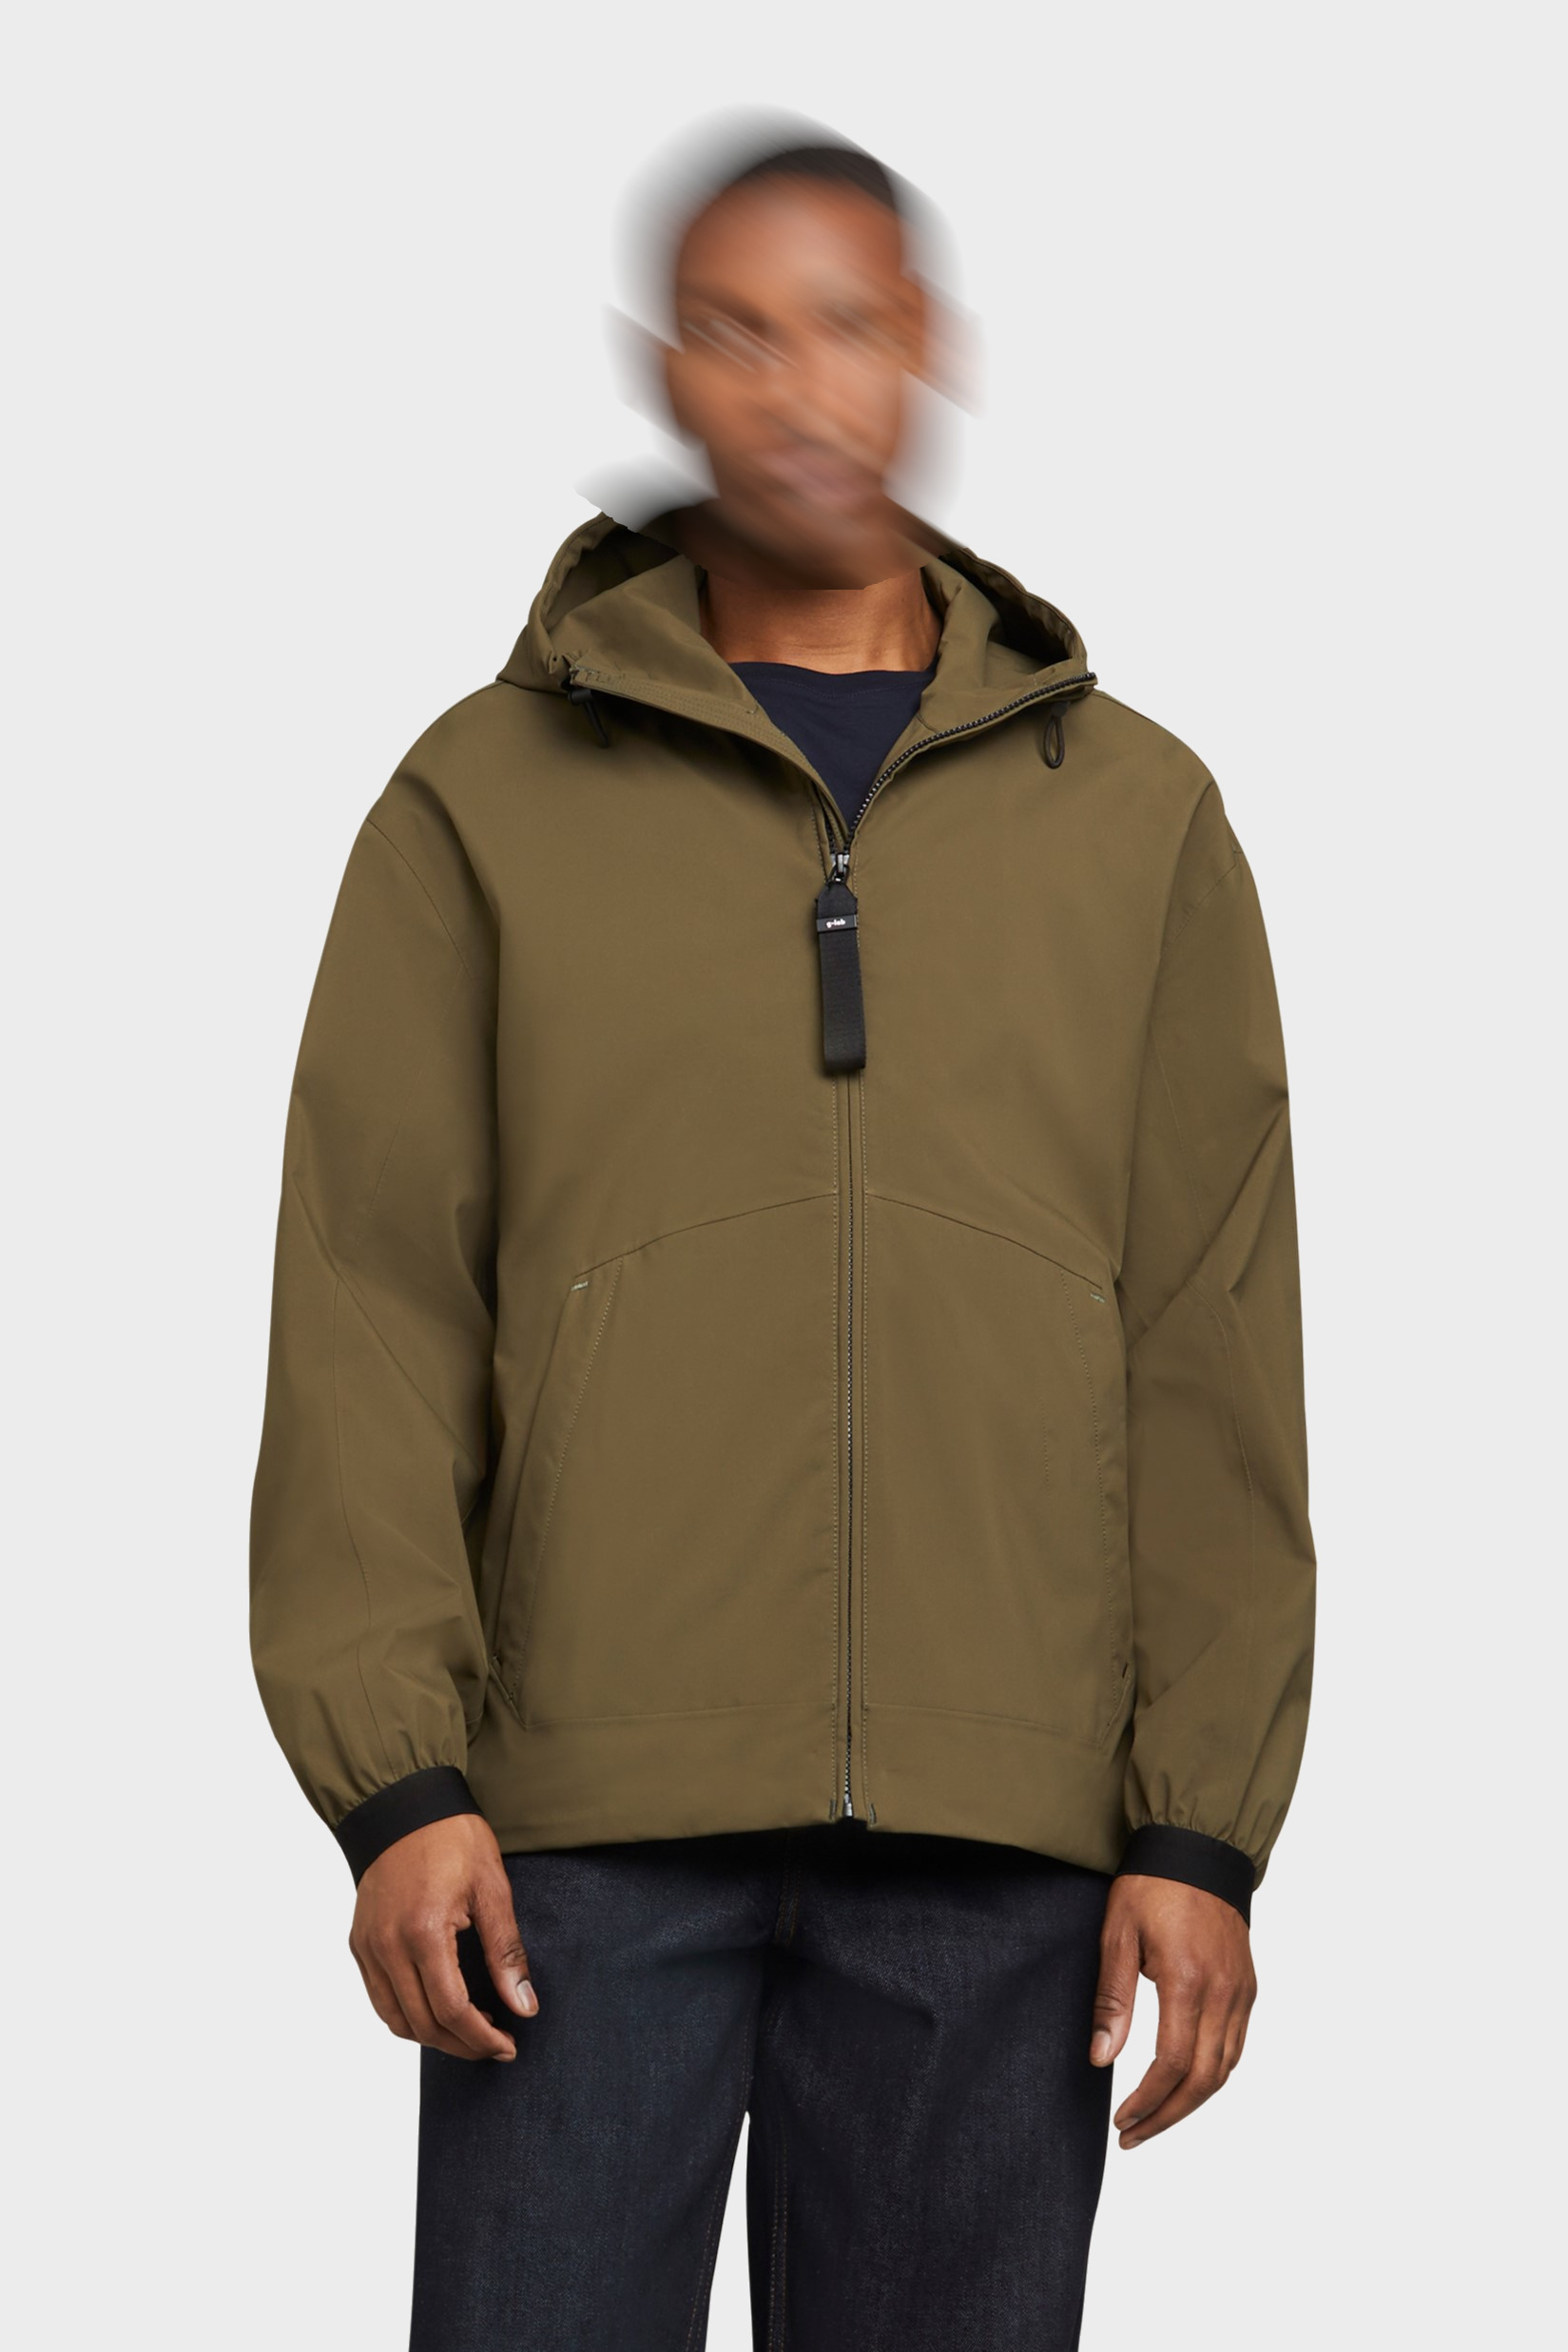 G-LAB Waterproof Light Jacket Pace in Olive